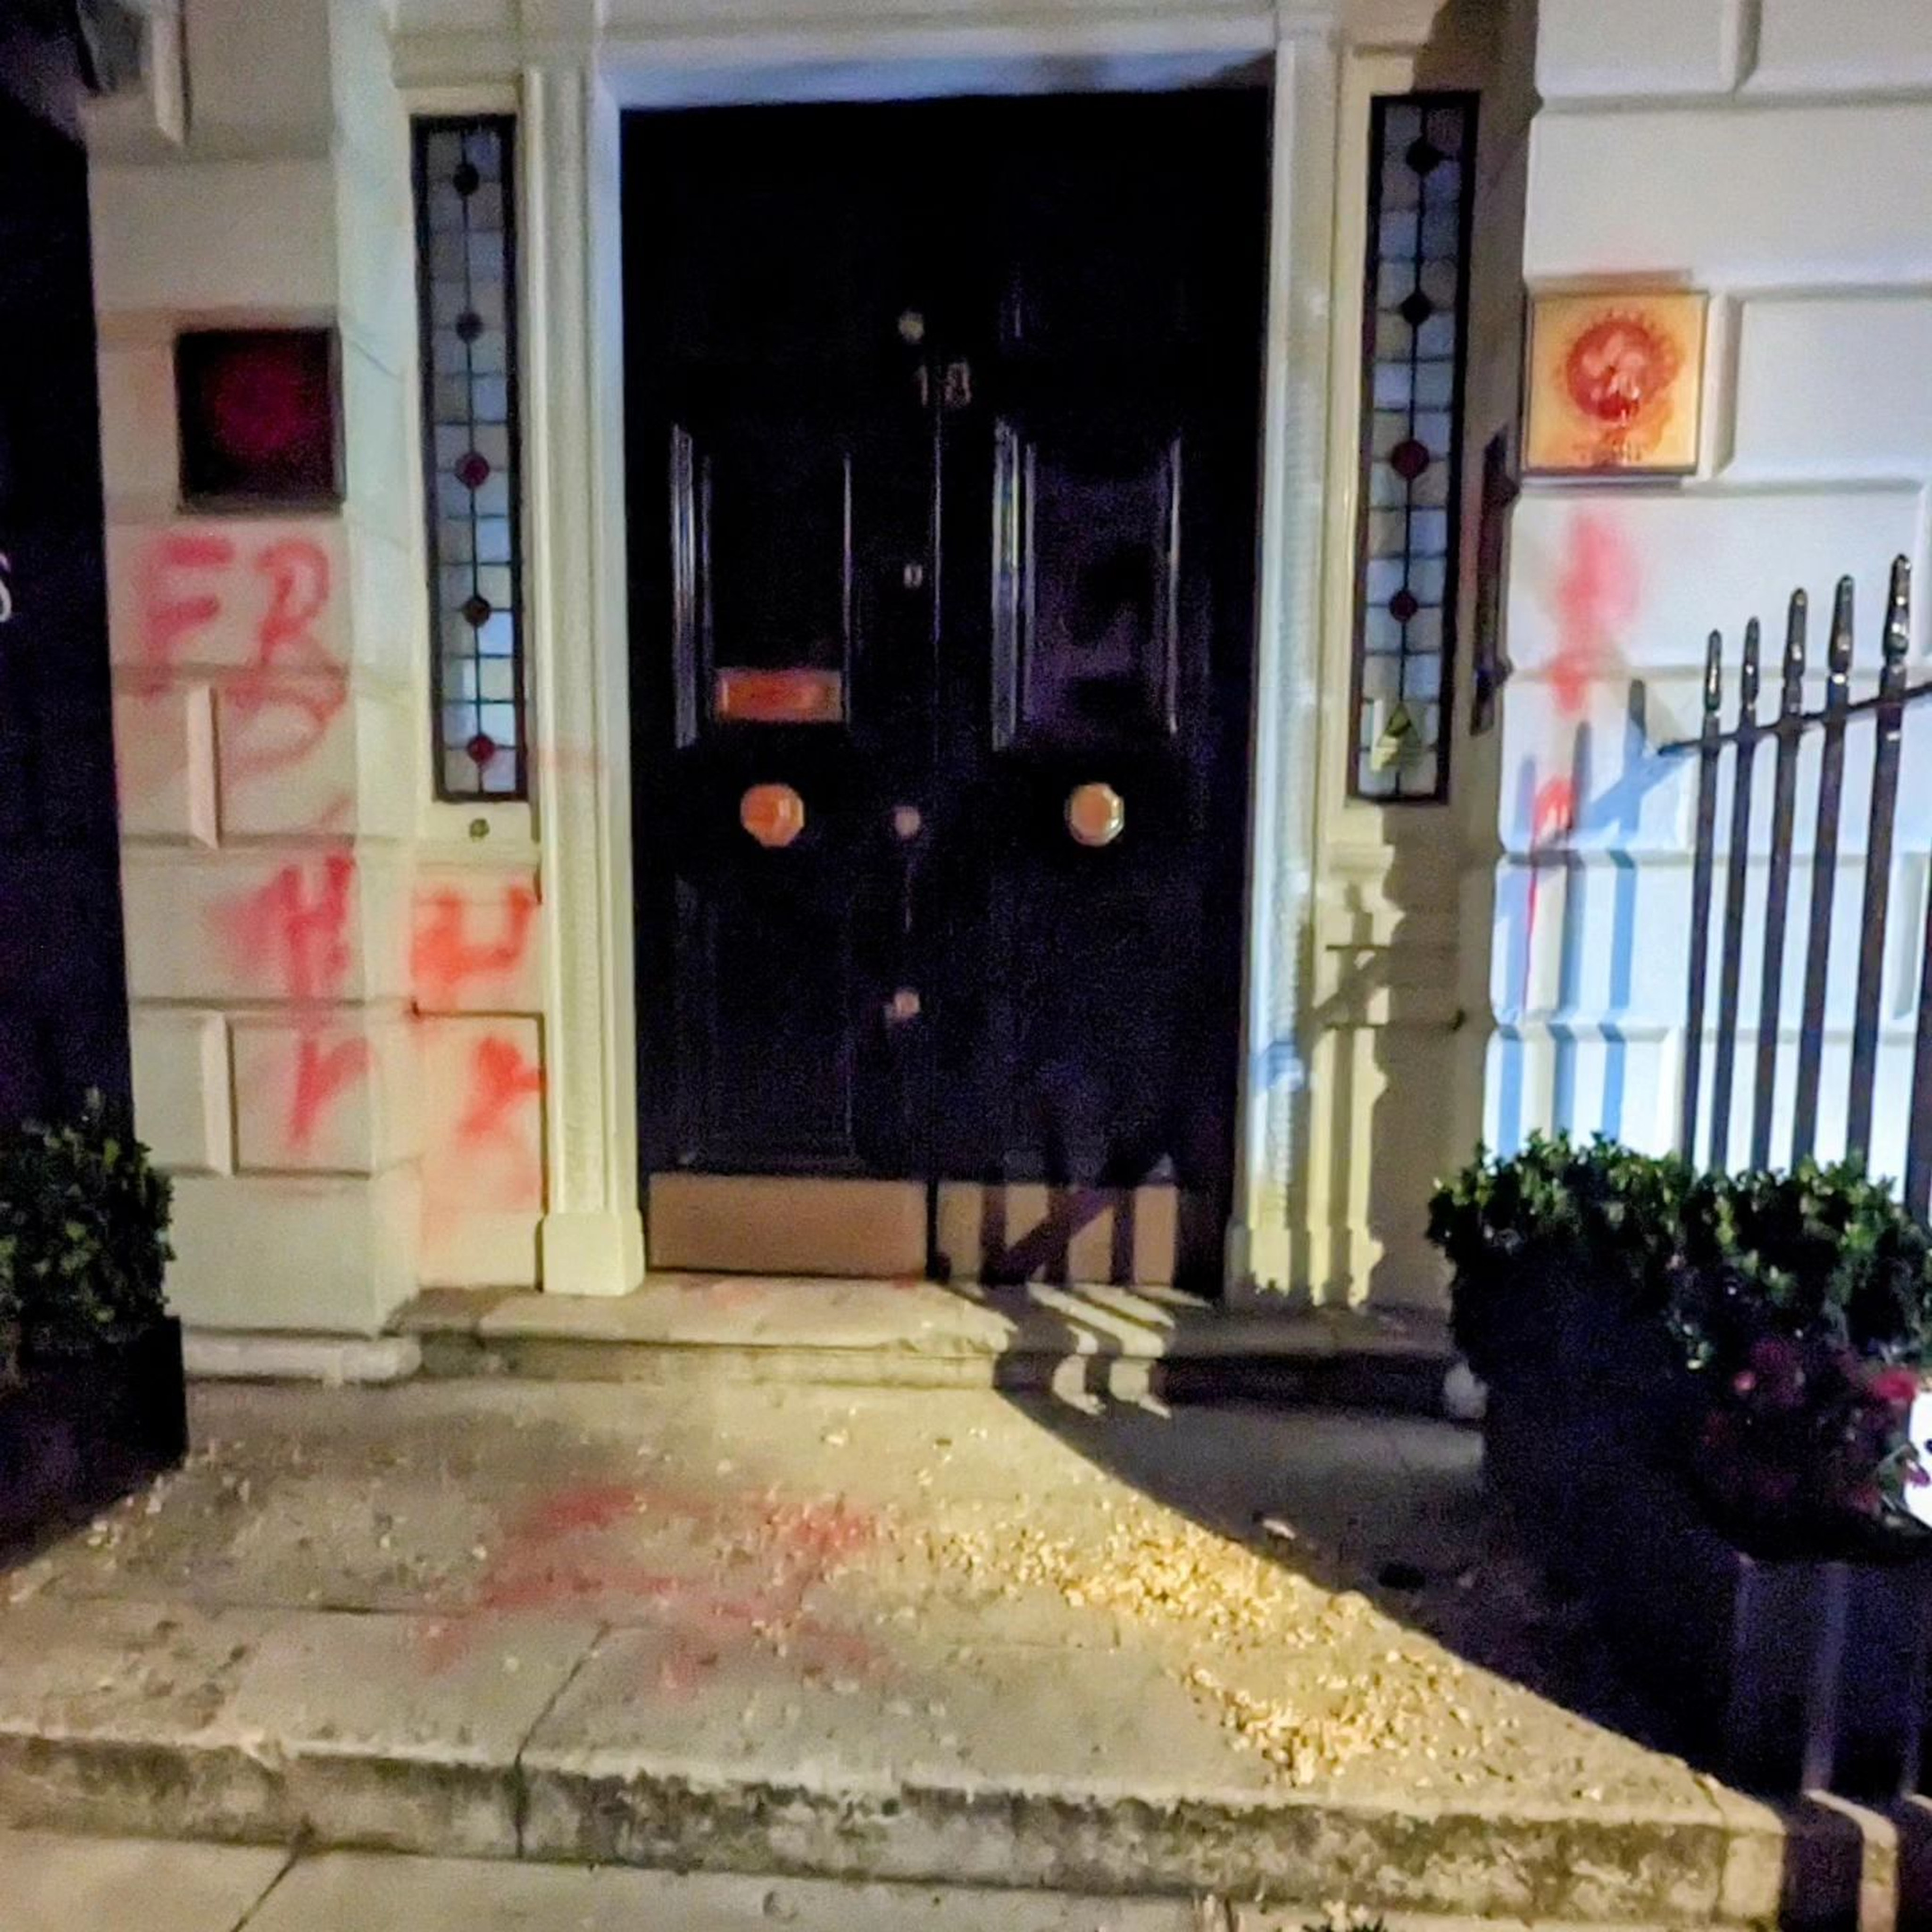 The damage done by vandals to the entrance of the Hong Kong economic and trade office in London, which has been condemned by the government. Photo: SCMP